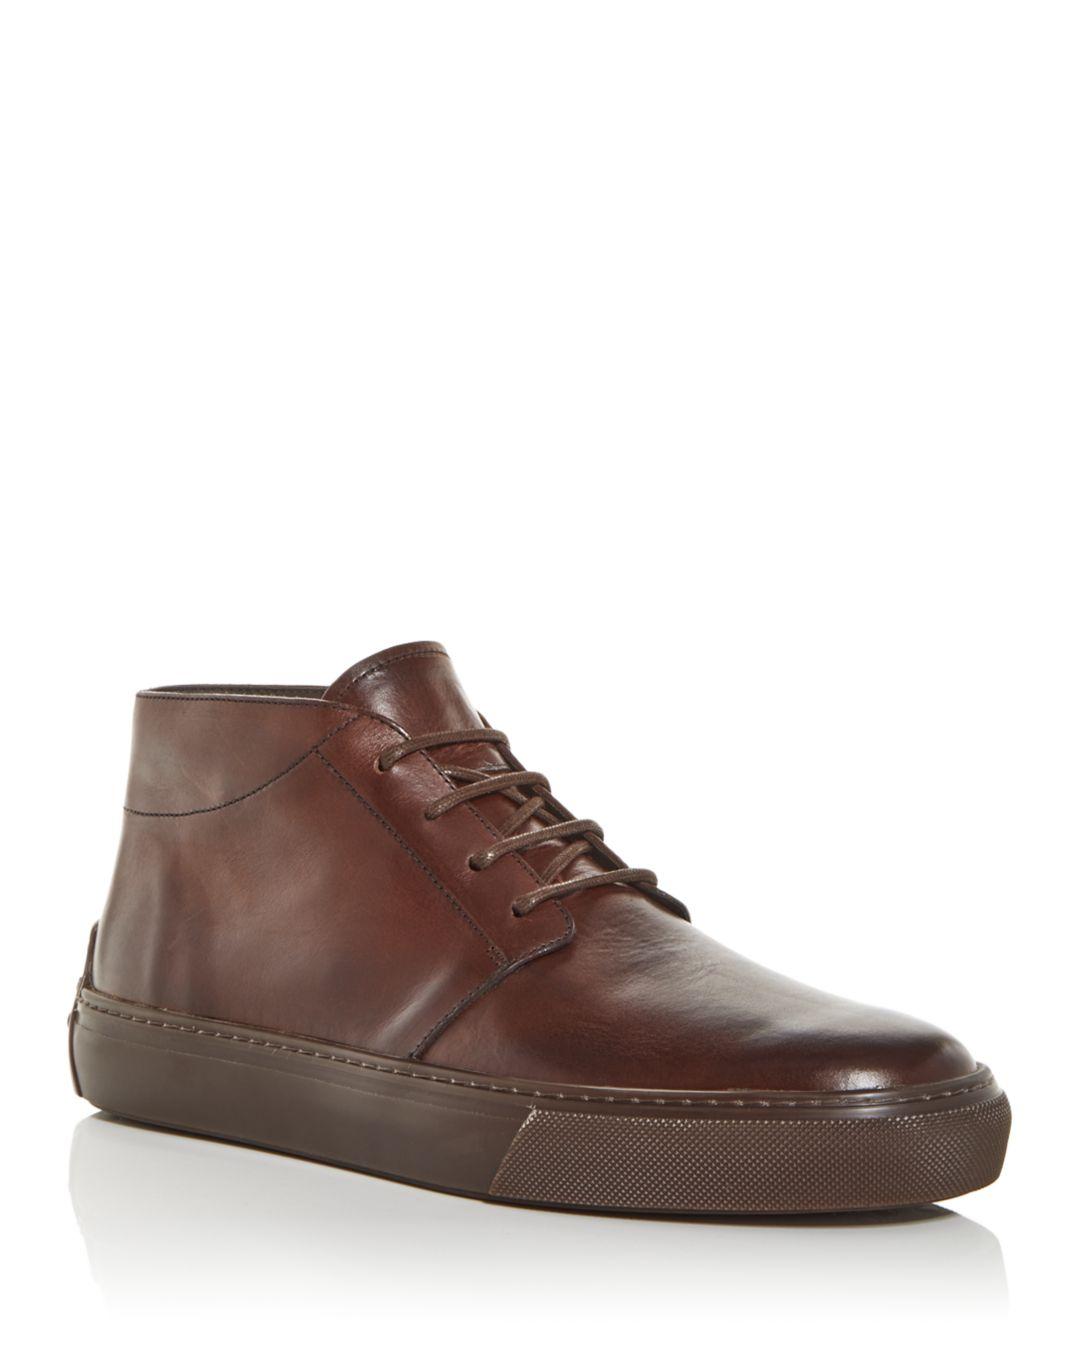 Tod's Polacco Cassetta High Top Sneakers in Brown for Men | Lyst